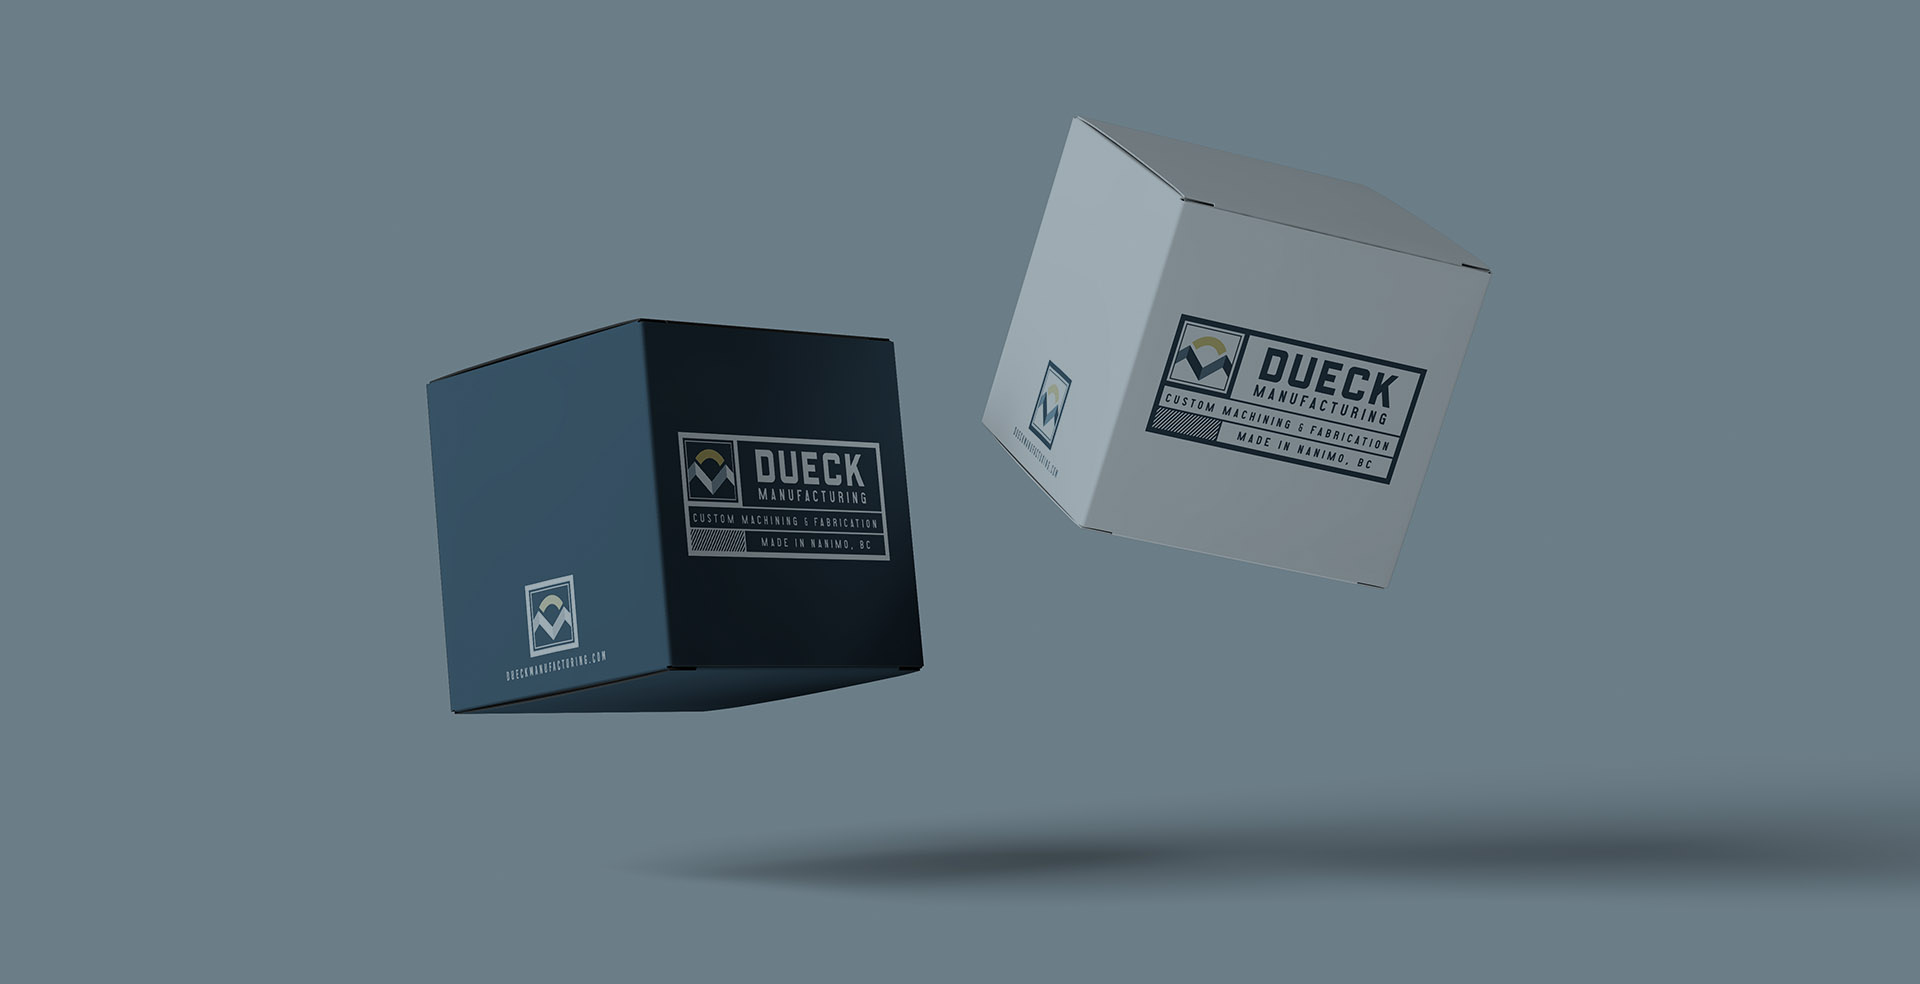 Dueck Manufacturing